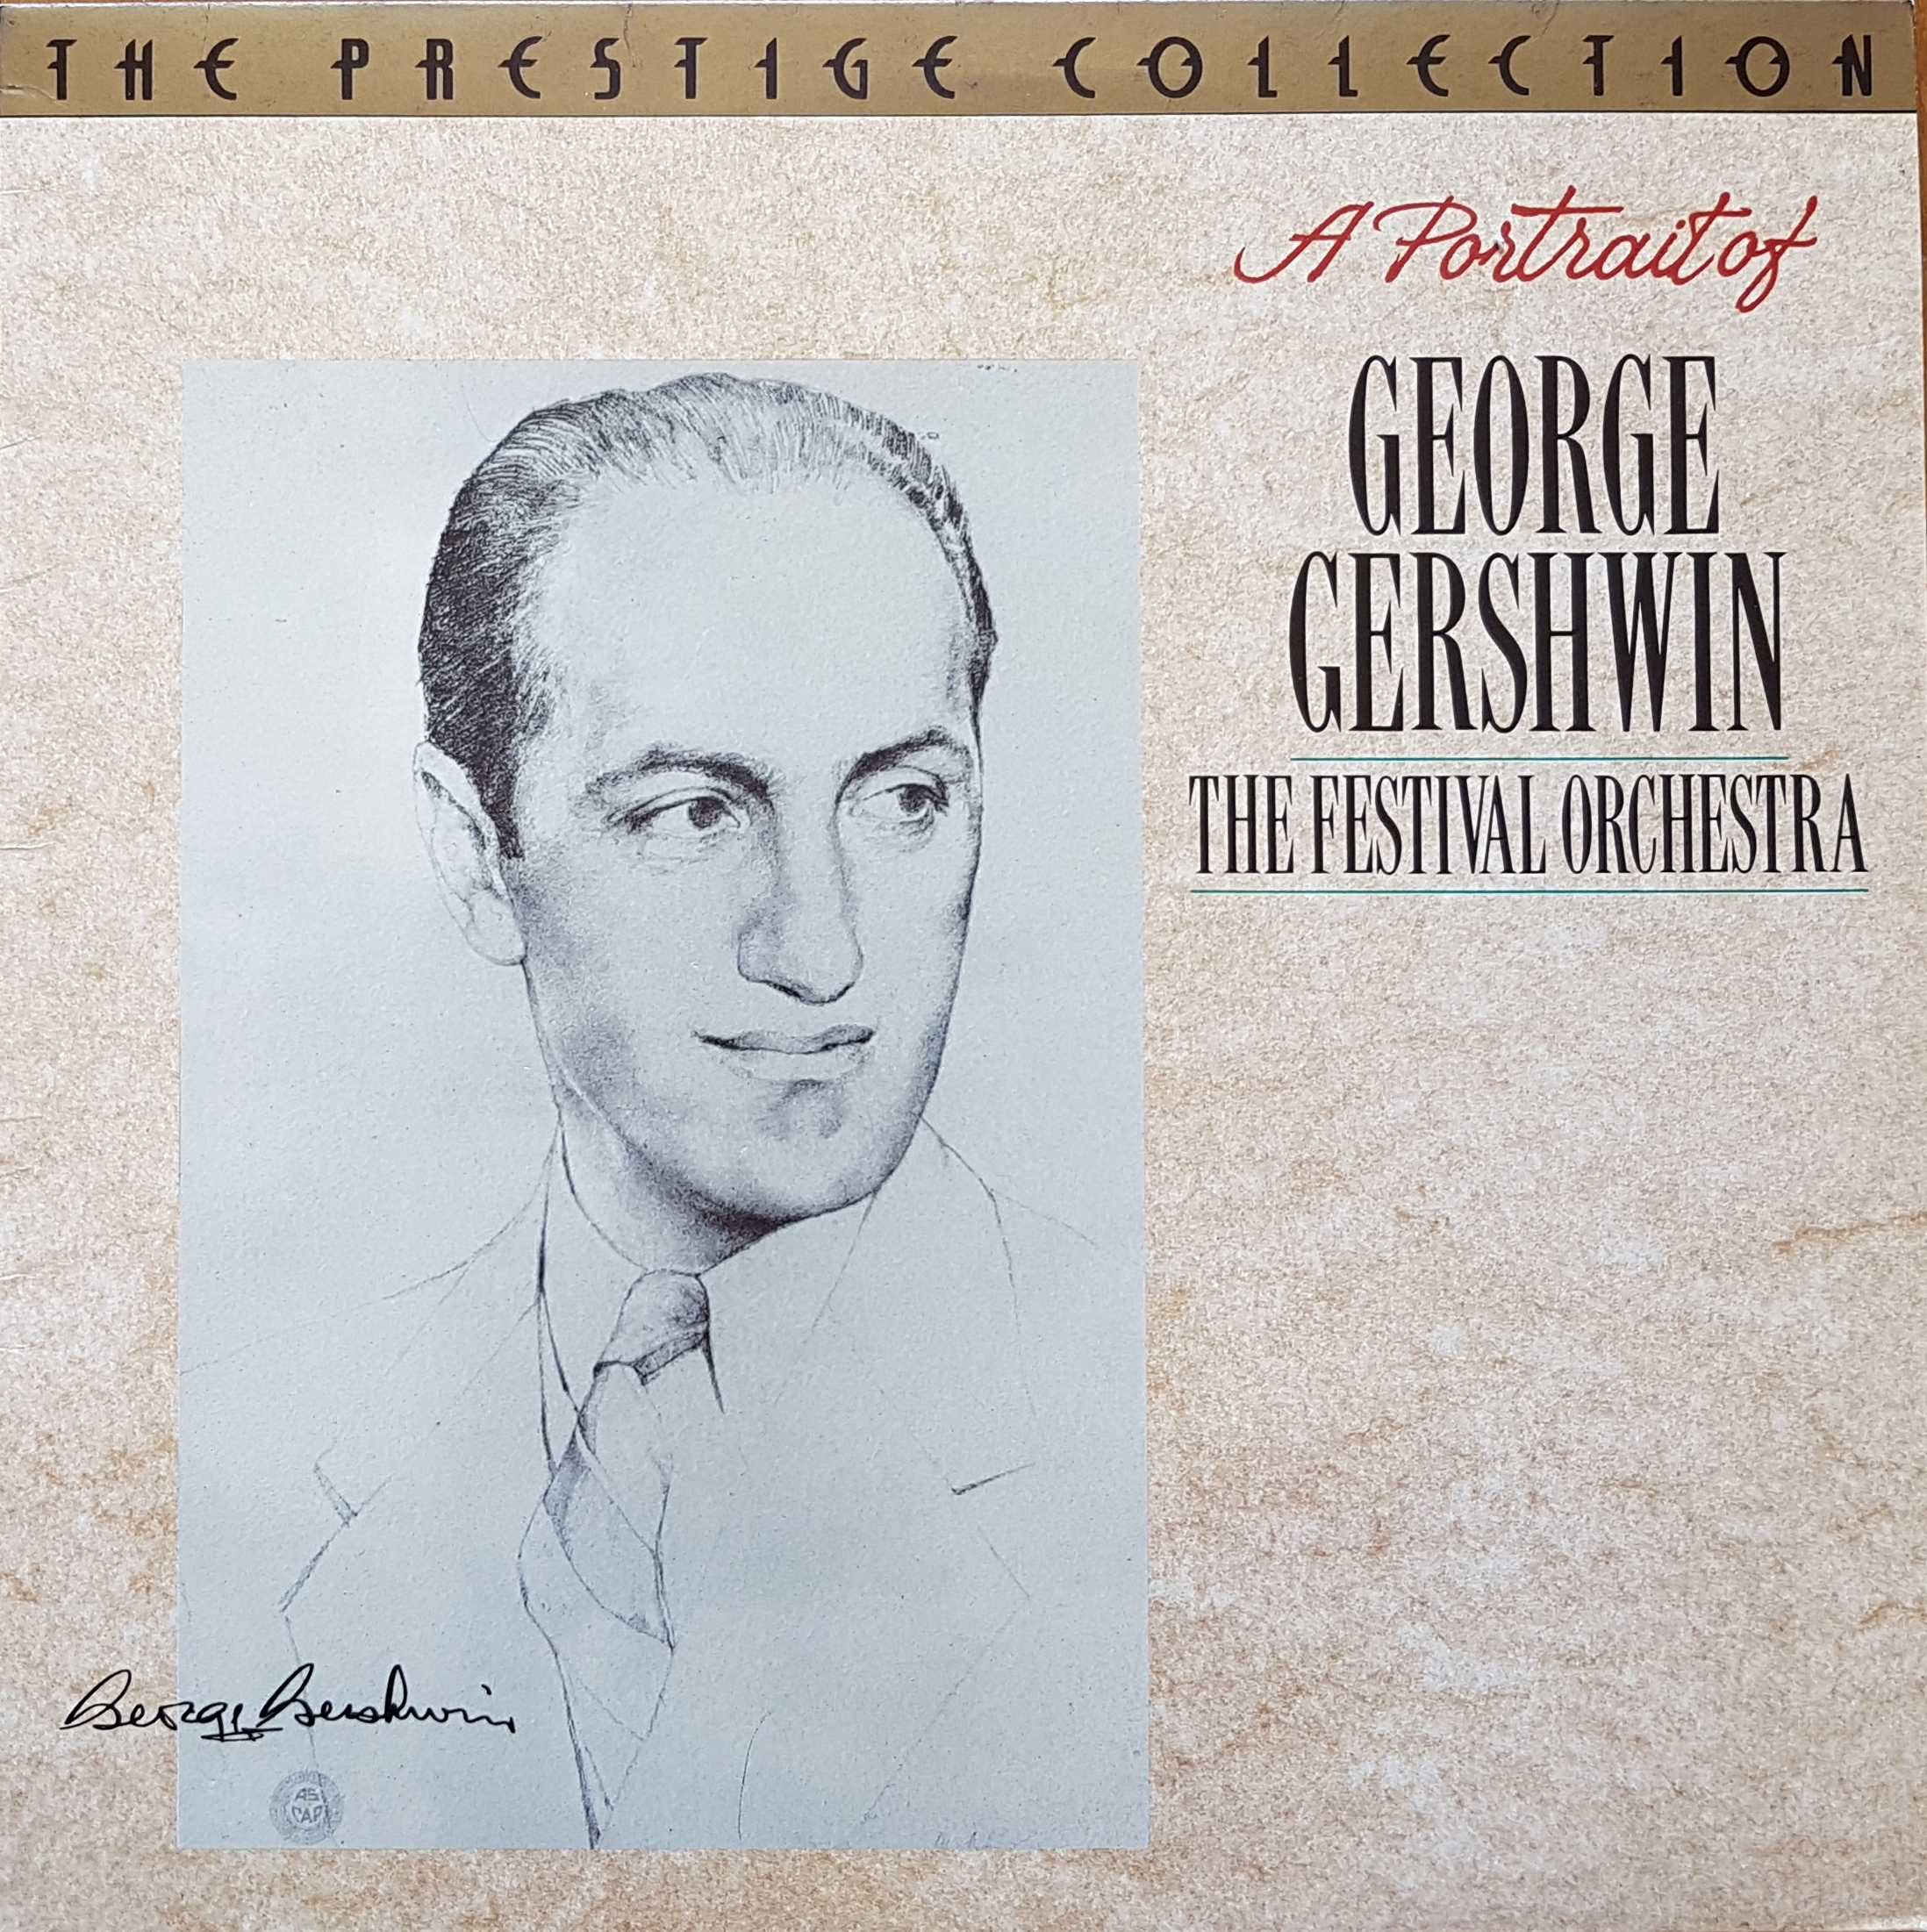 Picture of PREC 5010 A portrait of George Gershwin by artist George Gershwin from the BBC albums - Records and Tapes library